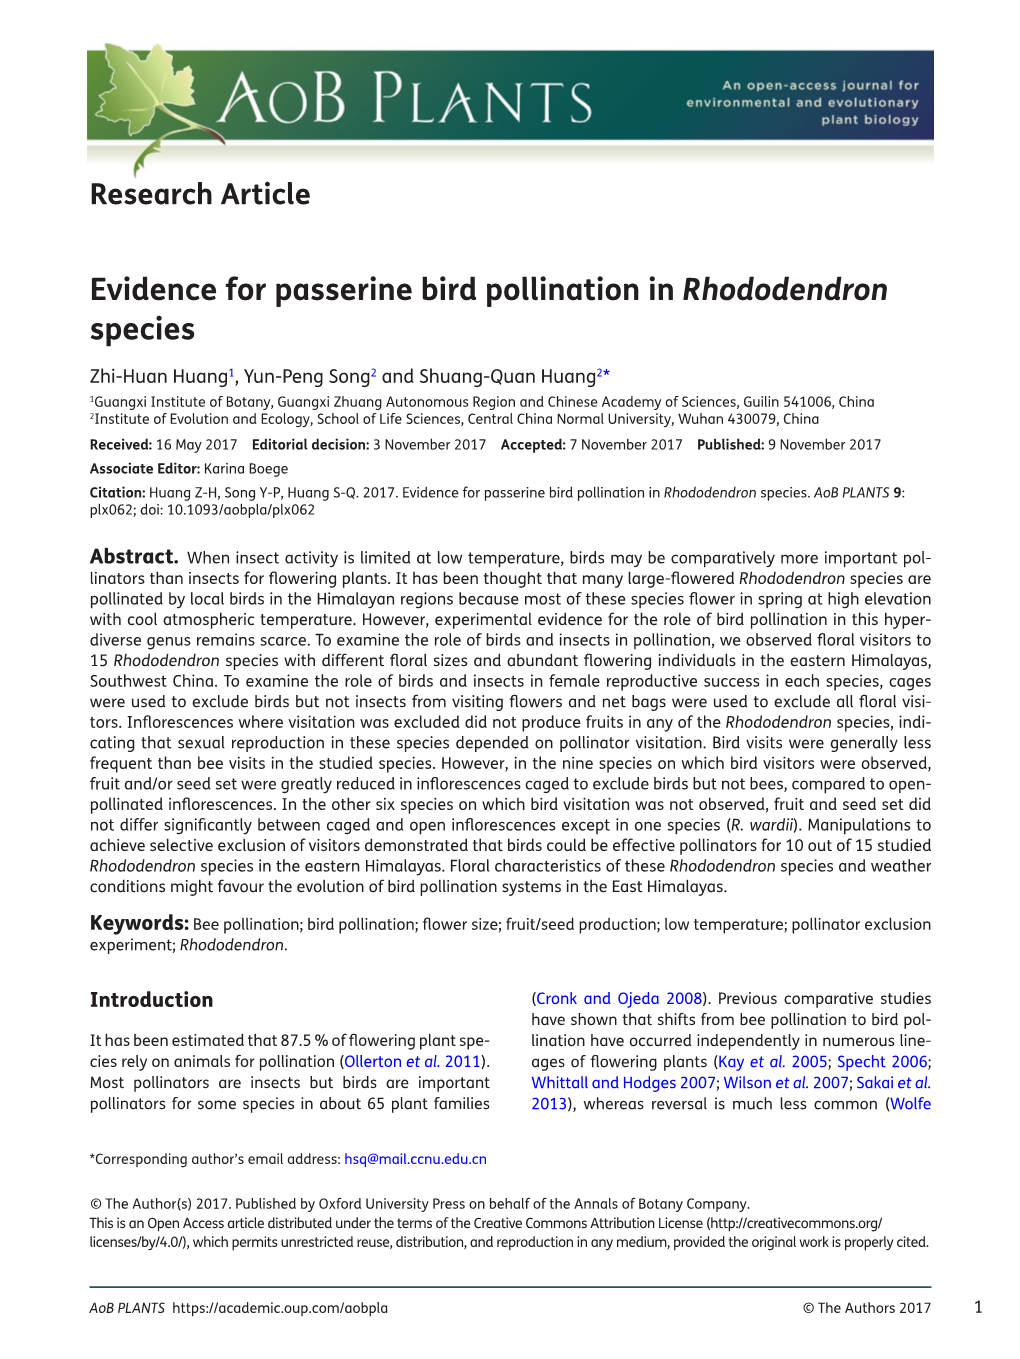 Evidence for Passerine Bird Pollination in Rhododendron Species